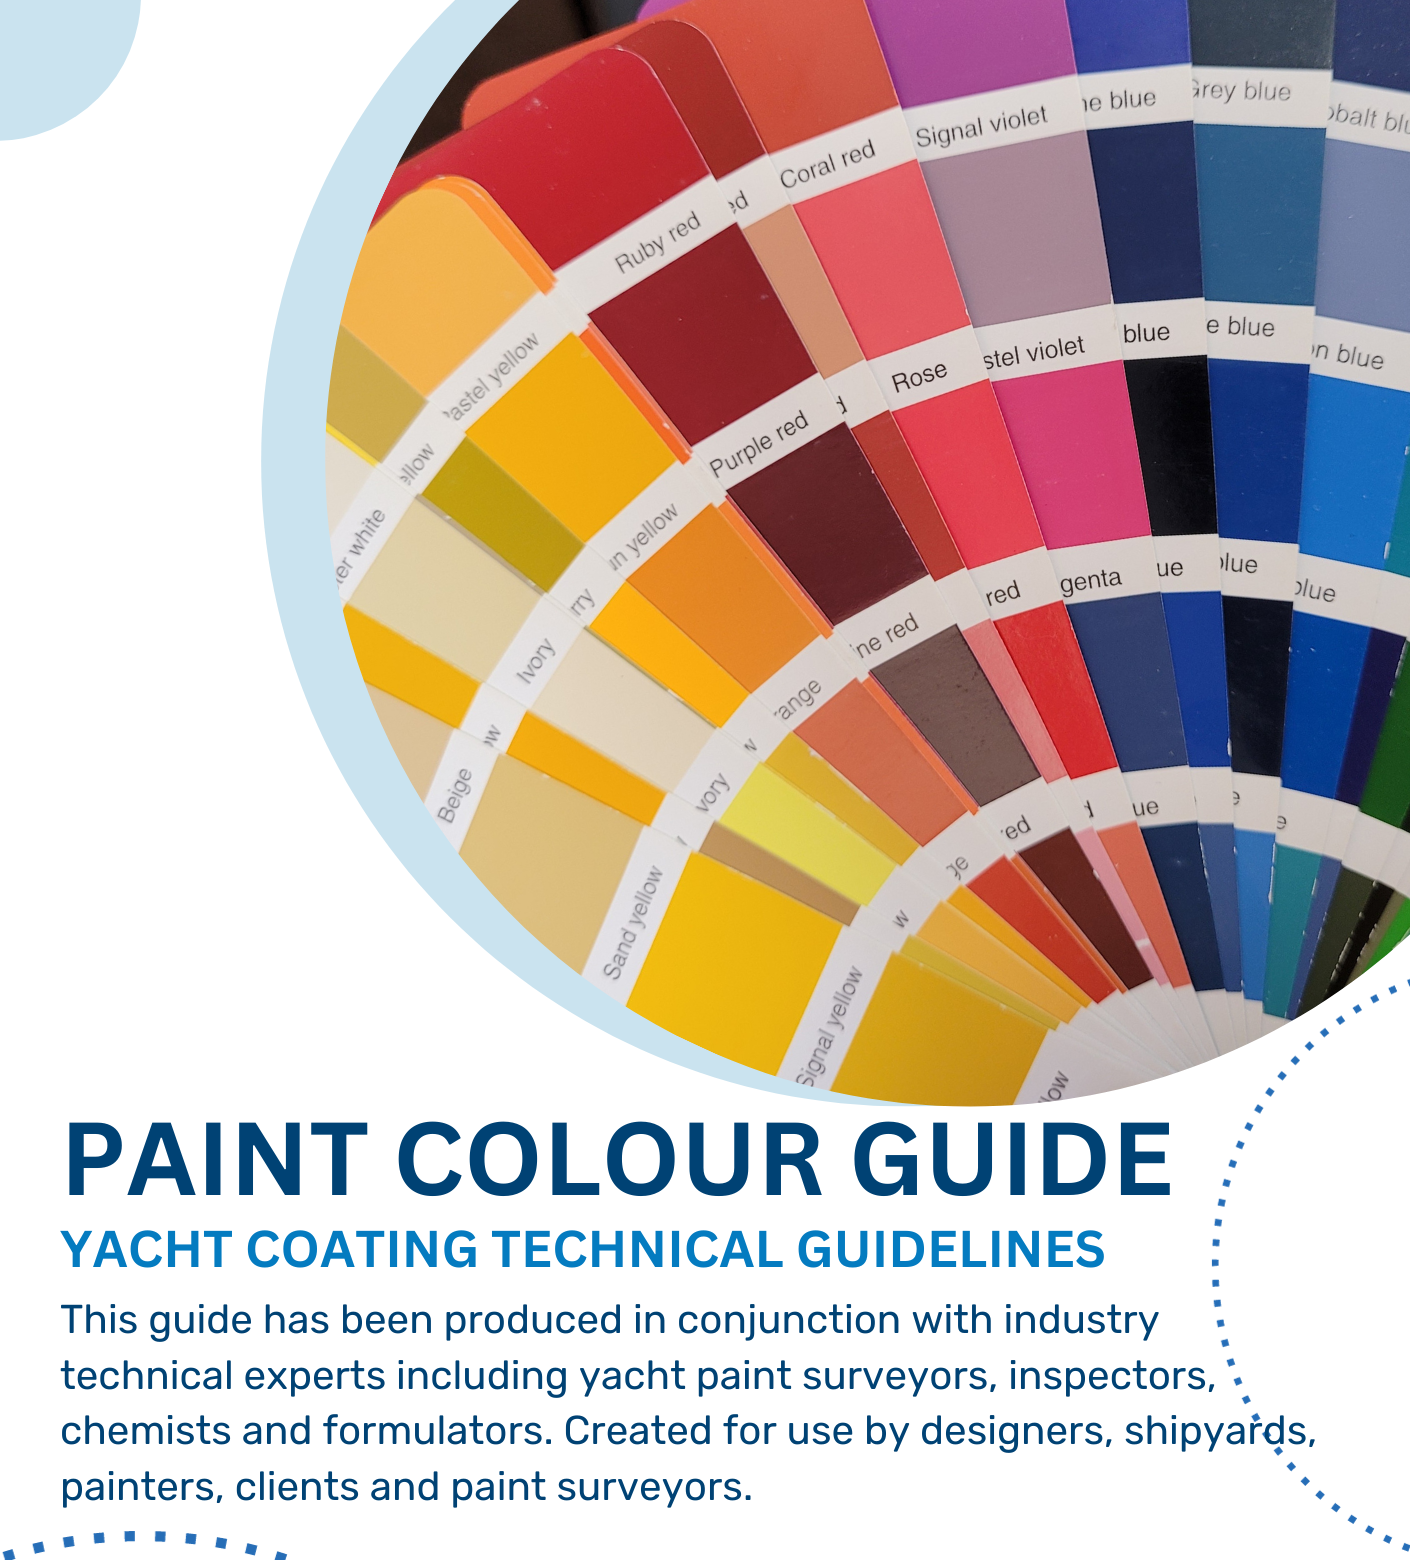 ICOMIA Launches New Paint Colour Guide